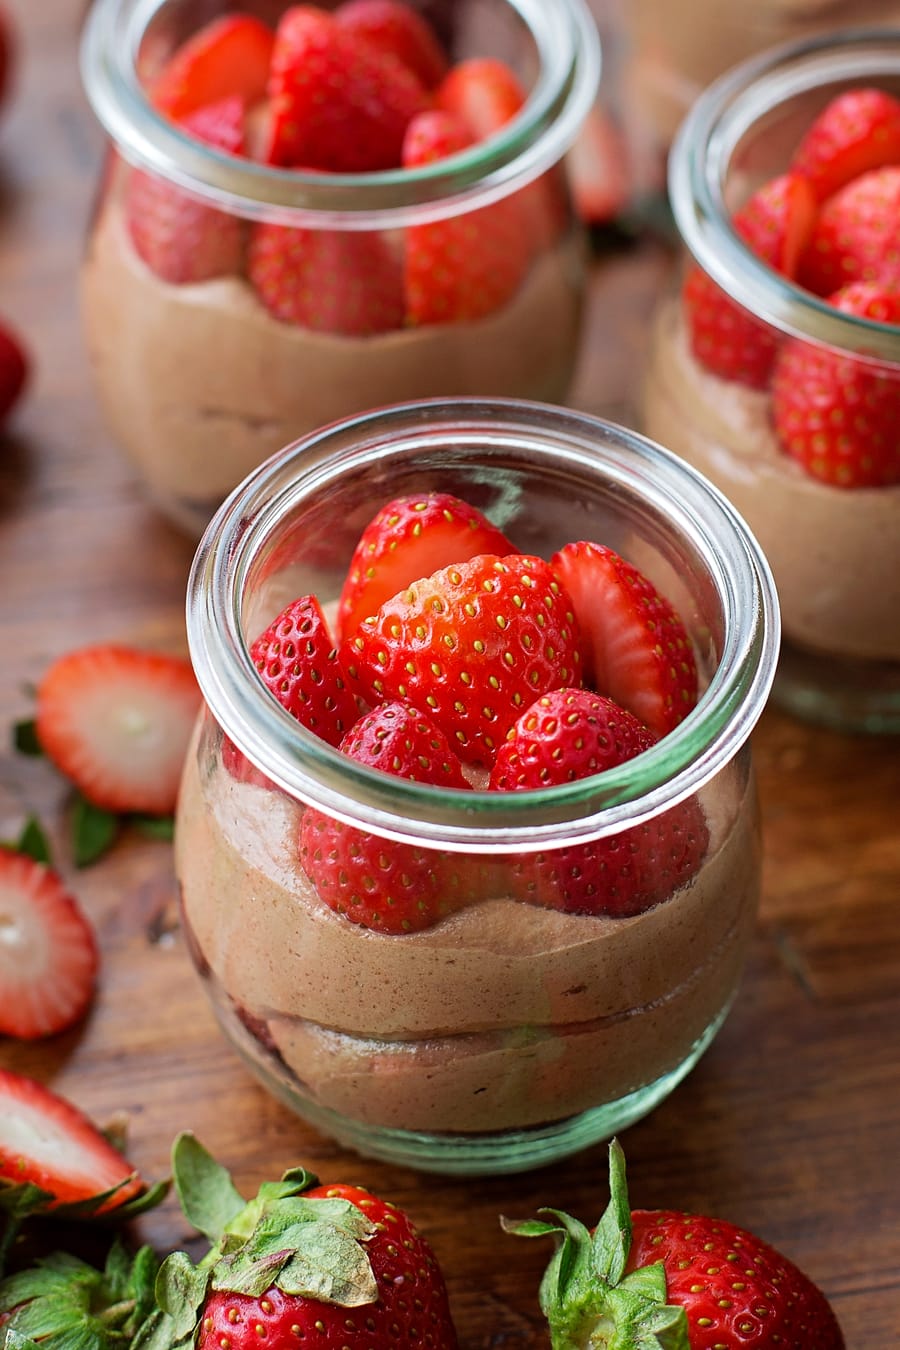 Nutella cheesecake topped with fresh cut strawberries